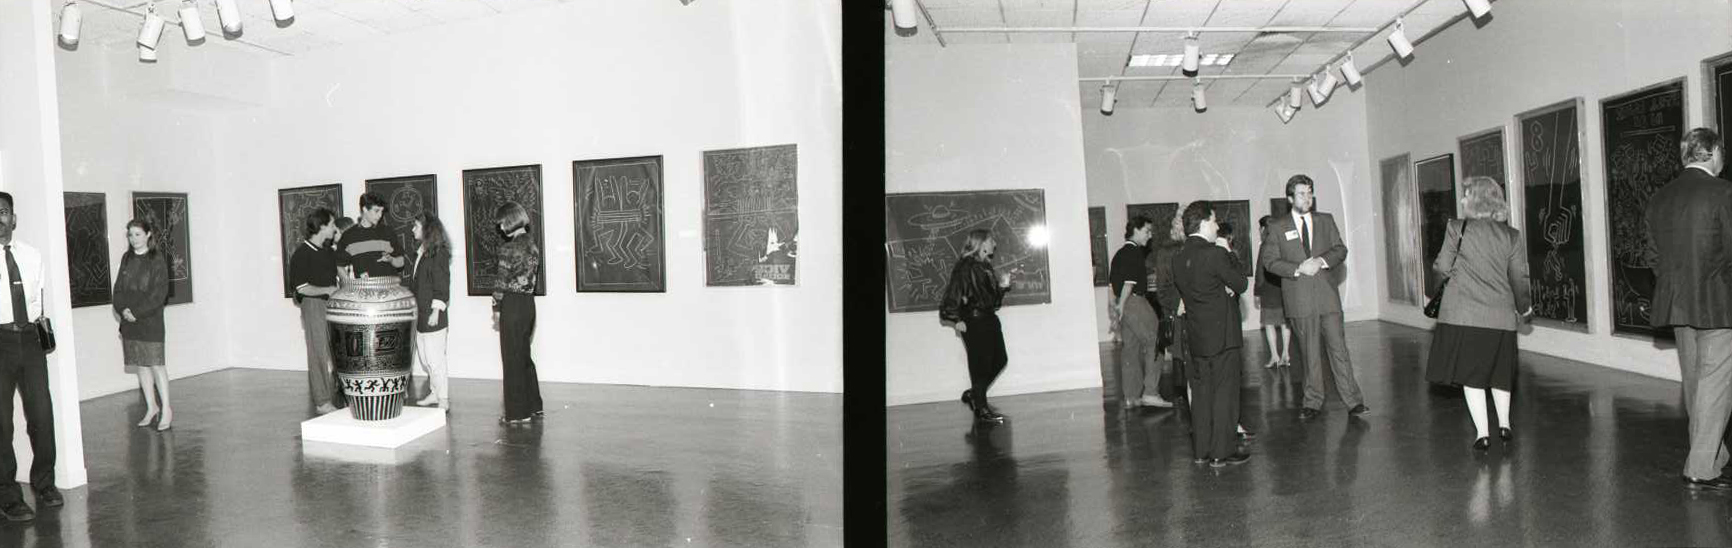 Two black and white photos, side by side. Both share views of the same gallery. The photo on the right captures a security guard, six patrons, and a large, patterned vase installed on a podium, in the center of the floor. Keith Haring’s drawings, on black paper, are installed in a centered row on the walls. The photo on the right captures a similar scene. Drawings installed in the same fashion and patrons walking about the gallery space. 